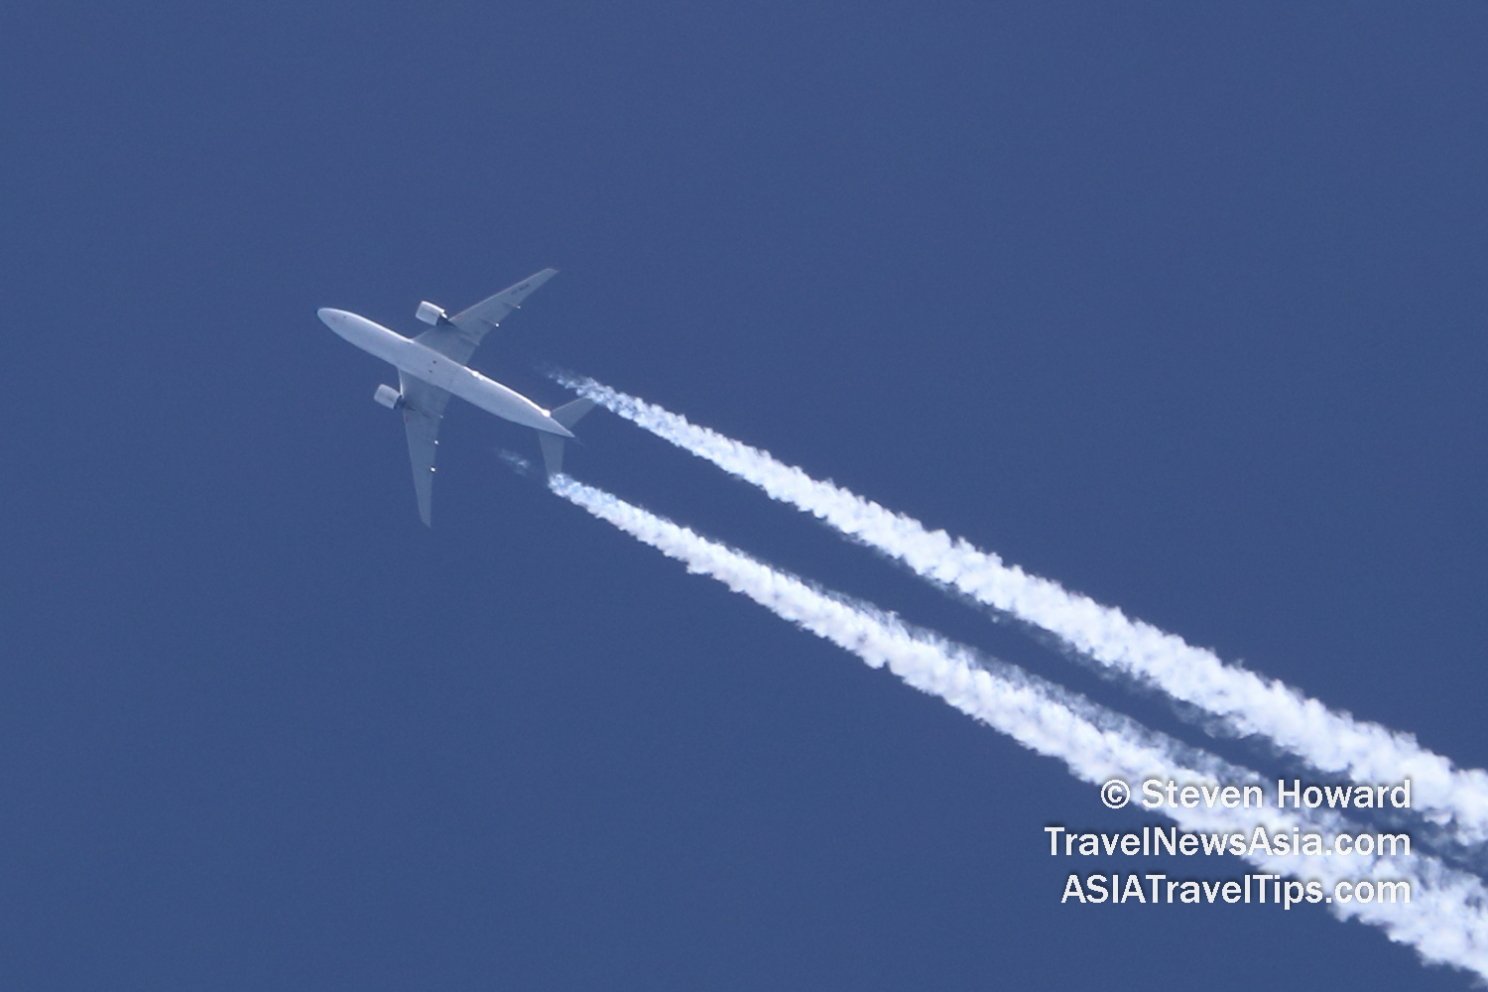 Contrails of an aircraft flying overhead. Picture by Steven Howard of TravelNewsAsia.com Click to enlarge.